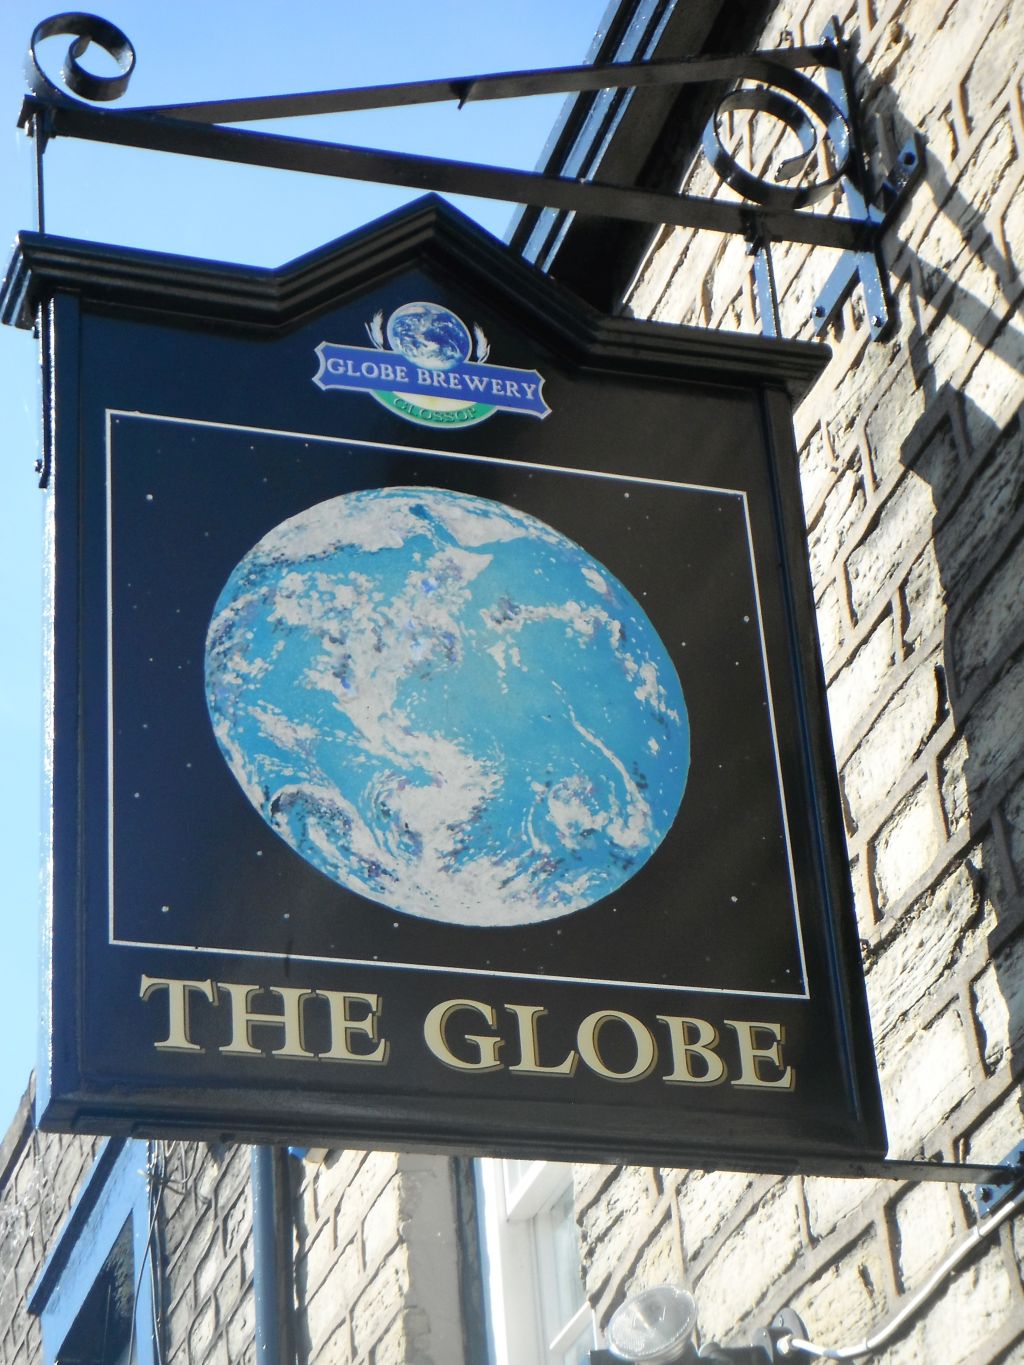 photo taken by me - The Globe pub sign, Glossop, Greater Manchester